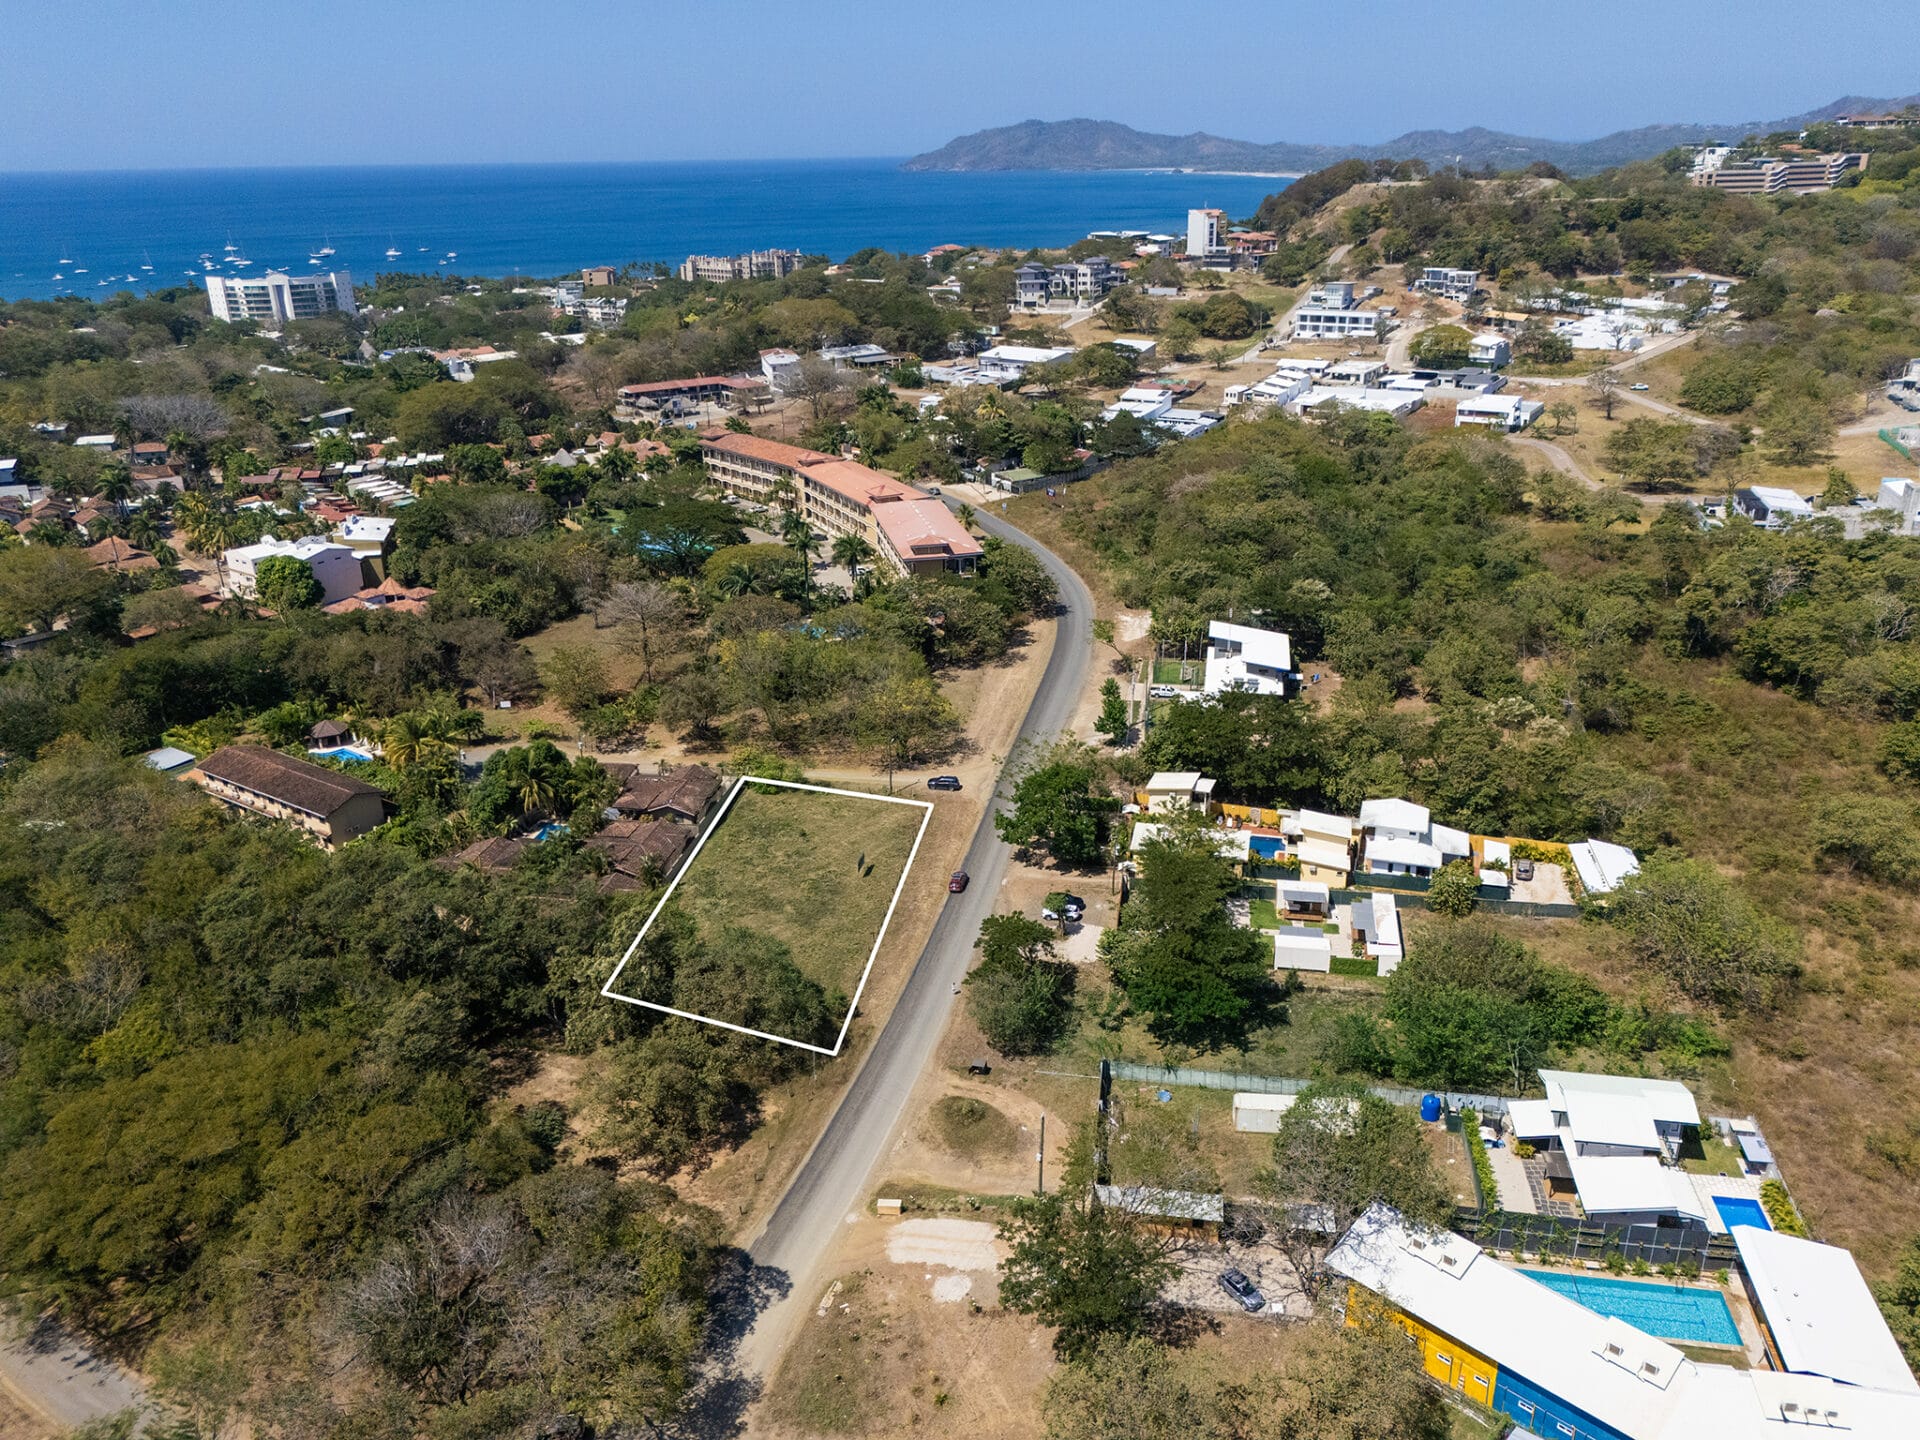 Commercial or Residential Tamarindo Lot – Close to Beach & Downtown, Has Water Letter!